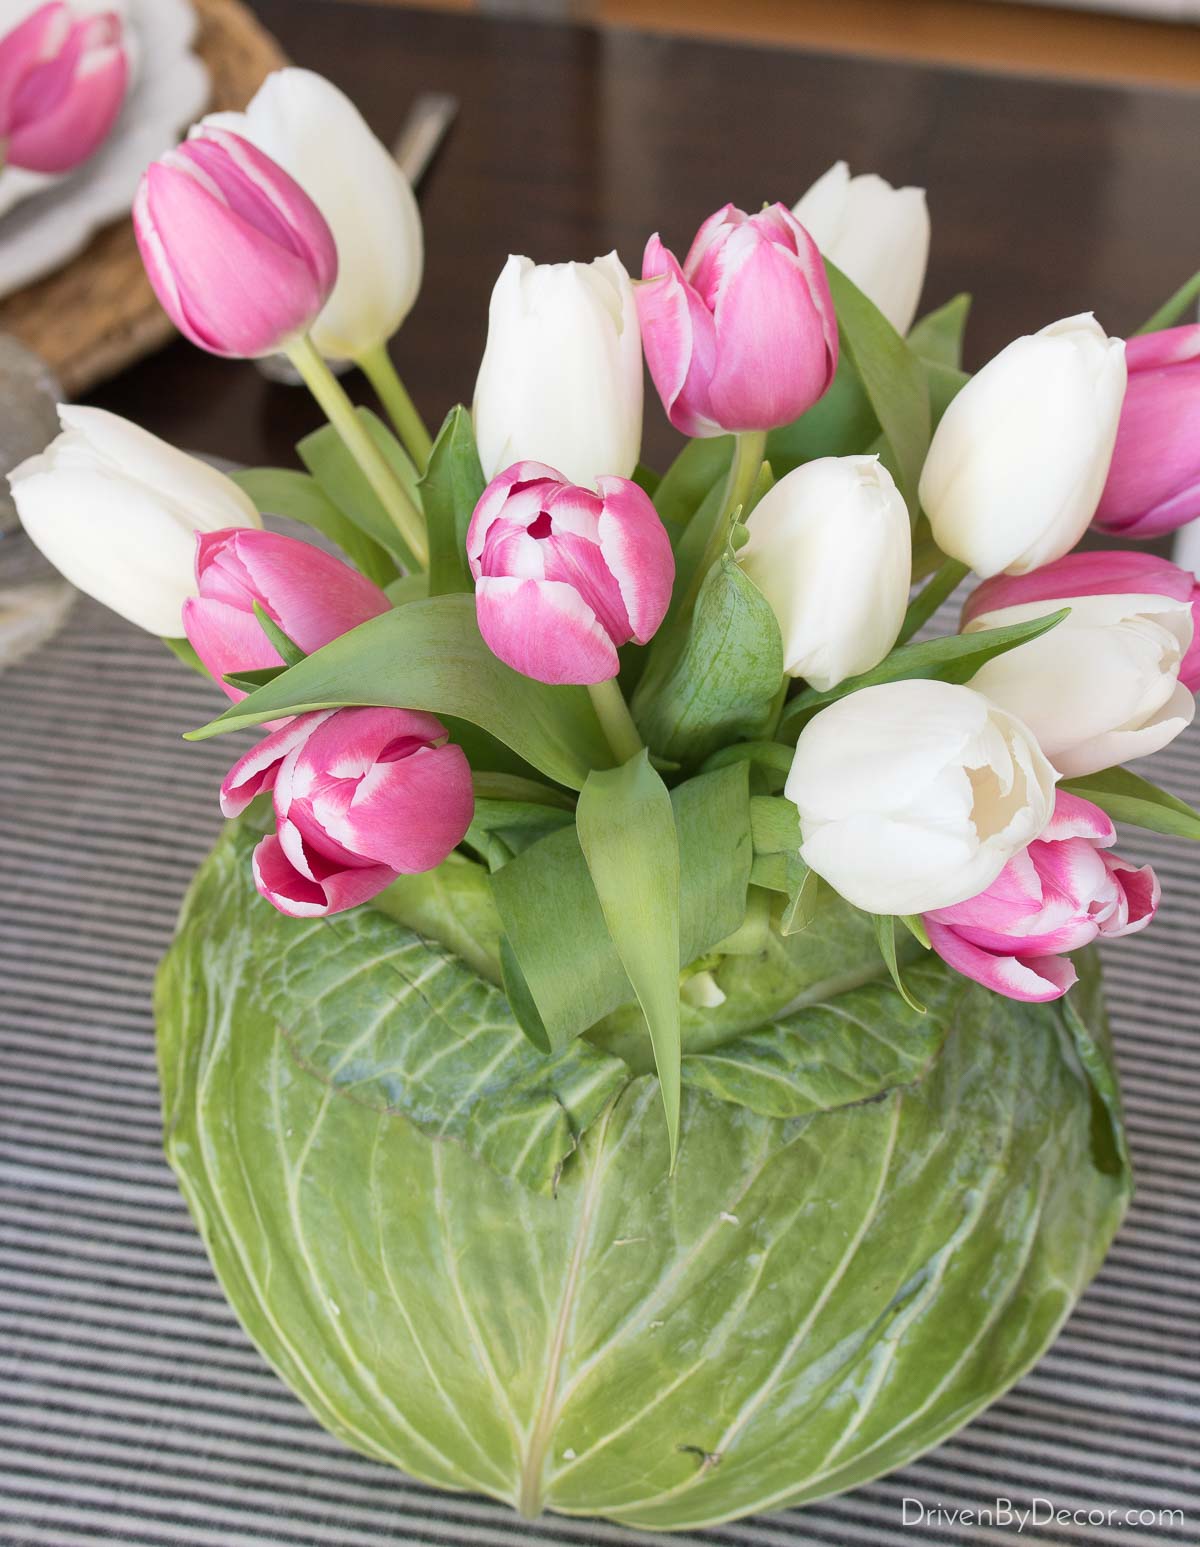 Cabbage filled with tulips